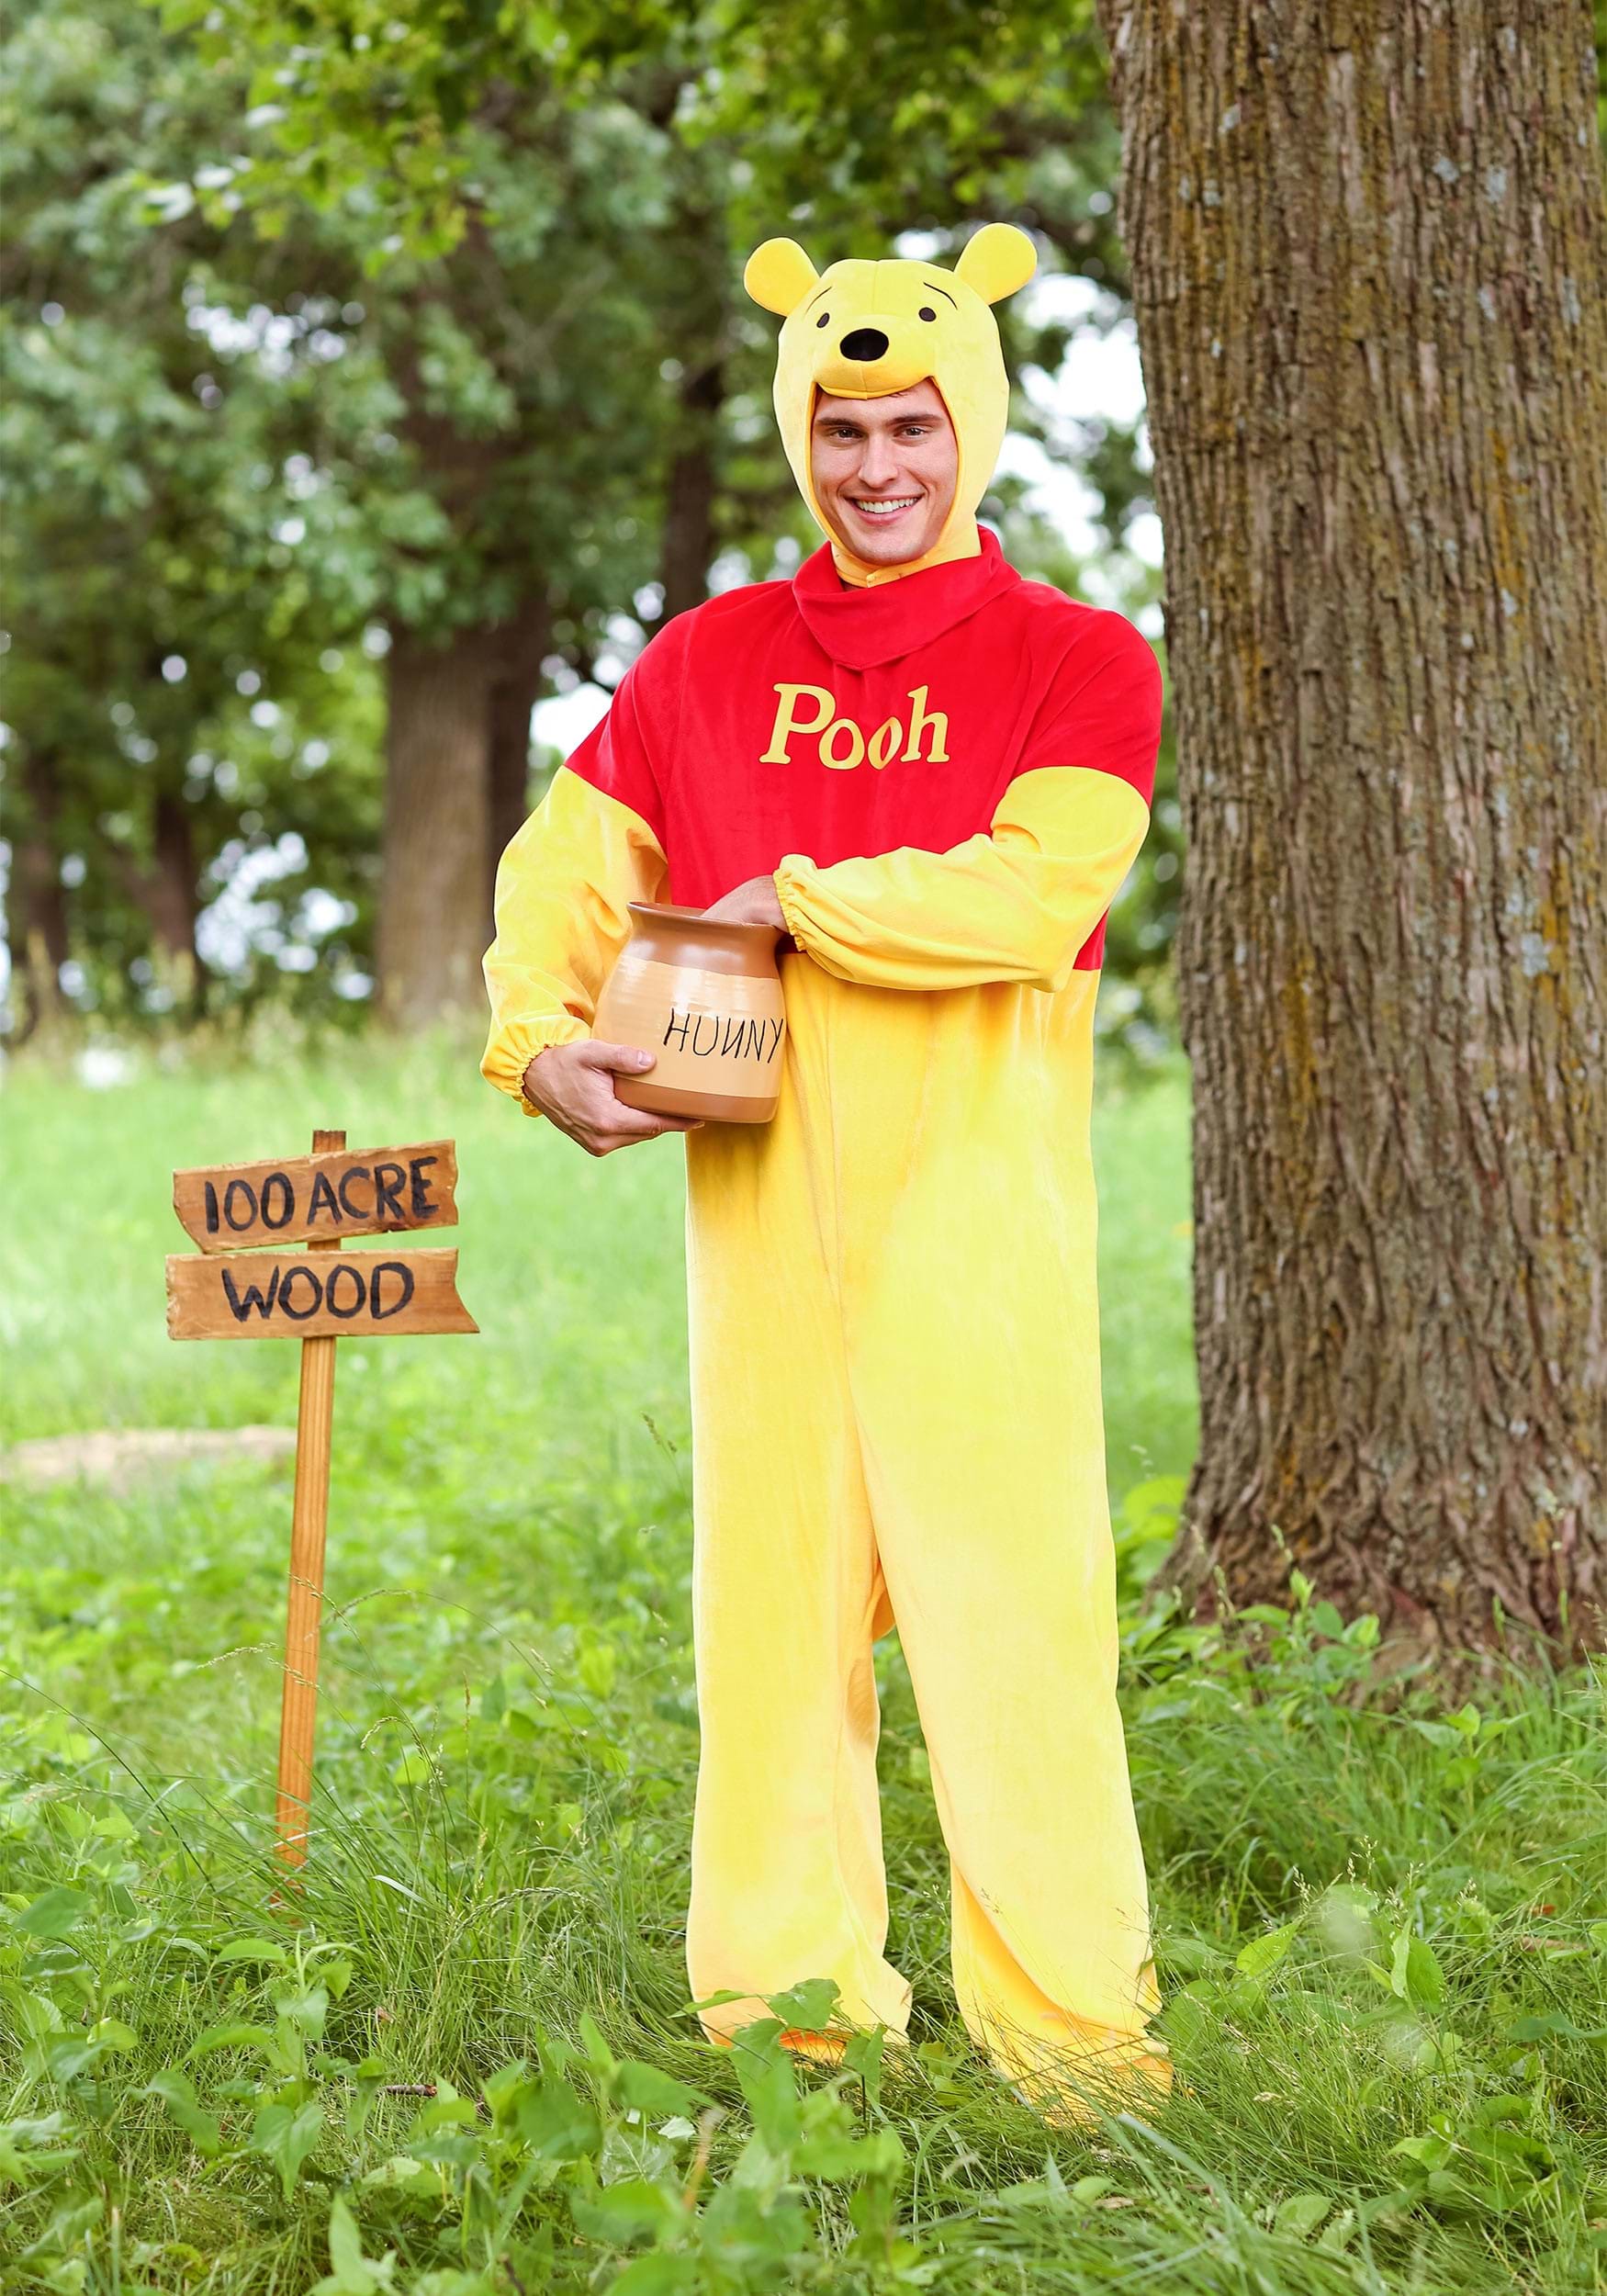 winnie the pooh costumes for halloween